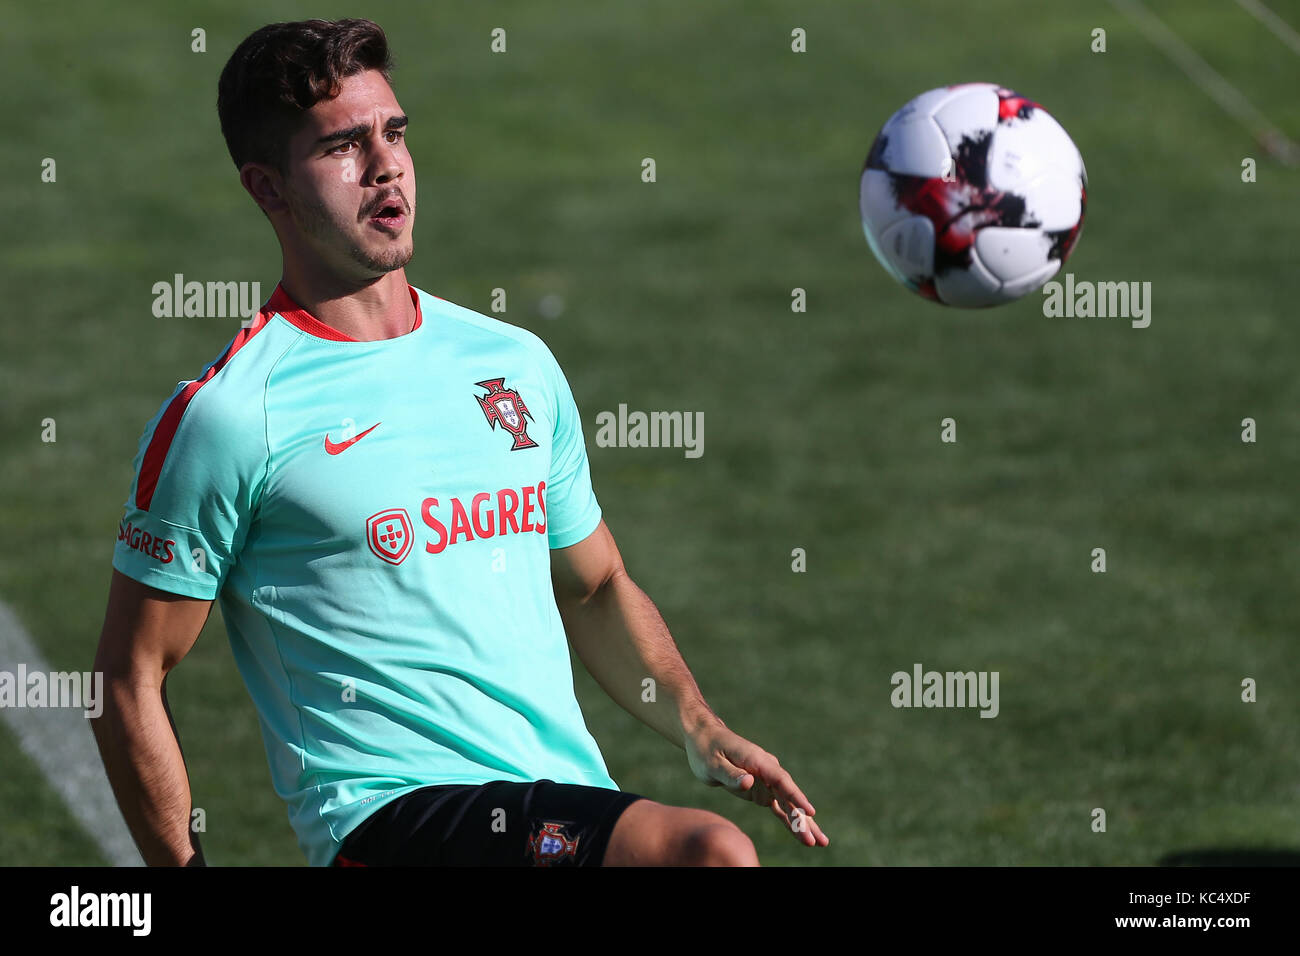 Lisbon, Portugal. 3rd Oct, 2017. Portugal's forward Andre Silva in action during the National Team Training session before the match between Portugal and Andorra at City Football in Oeiras, Lisbon on October 3, 2017. Credit: Bruno Barros/Alamy Live News Stock Photo